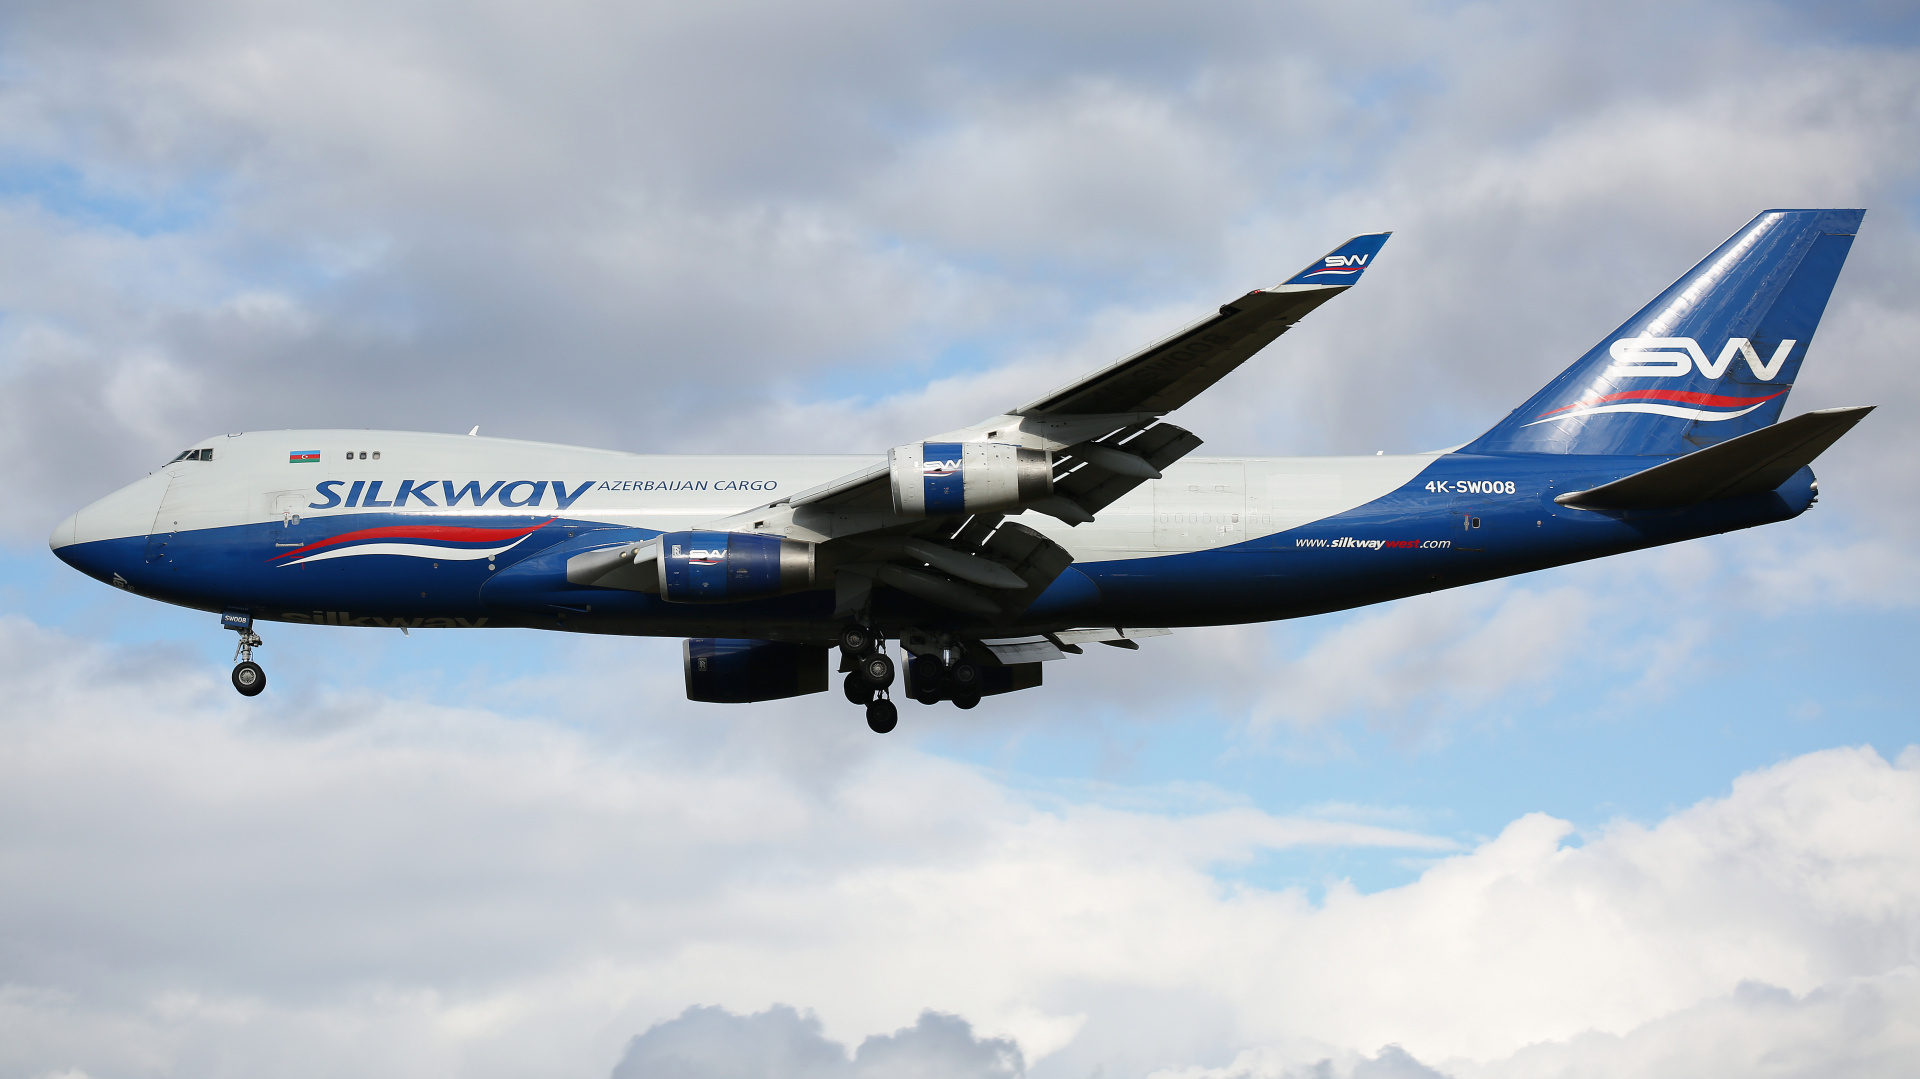 4K-SW008 (Aircraft » EPWA Spotting » Boeing 747-400F » Silk Way West Airlines)